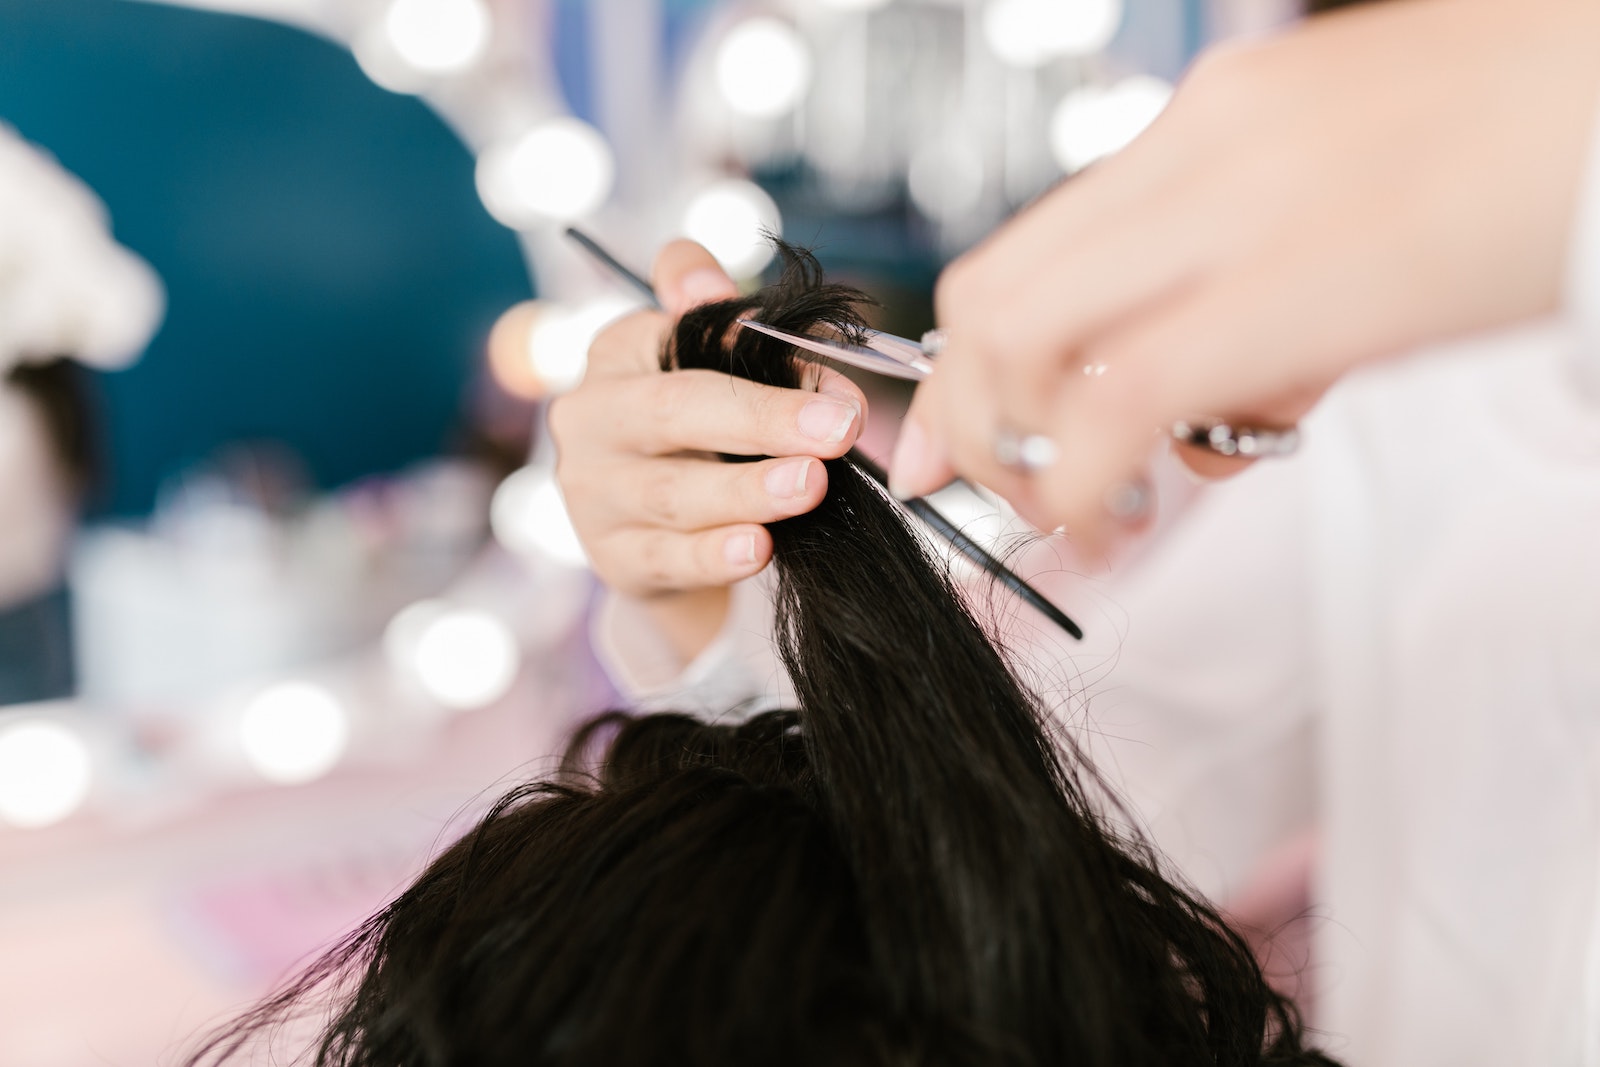 Get Regular Haircuts Schedule regular visits to your barber or hairstylist to keep your hair well-maintained and styled. Whether you prefer a classic cut or a trendy hairstyle, a fresh haircut can instantly elevate your appearance. ]]>